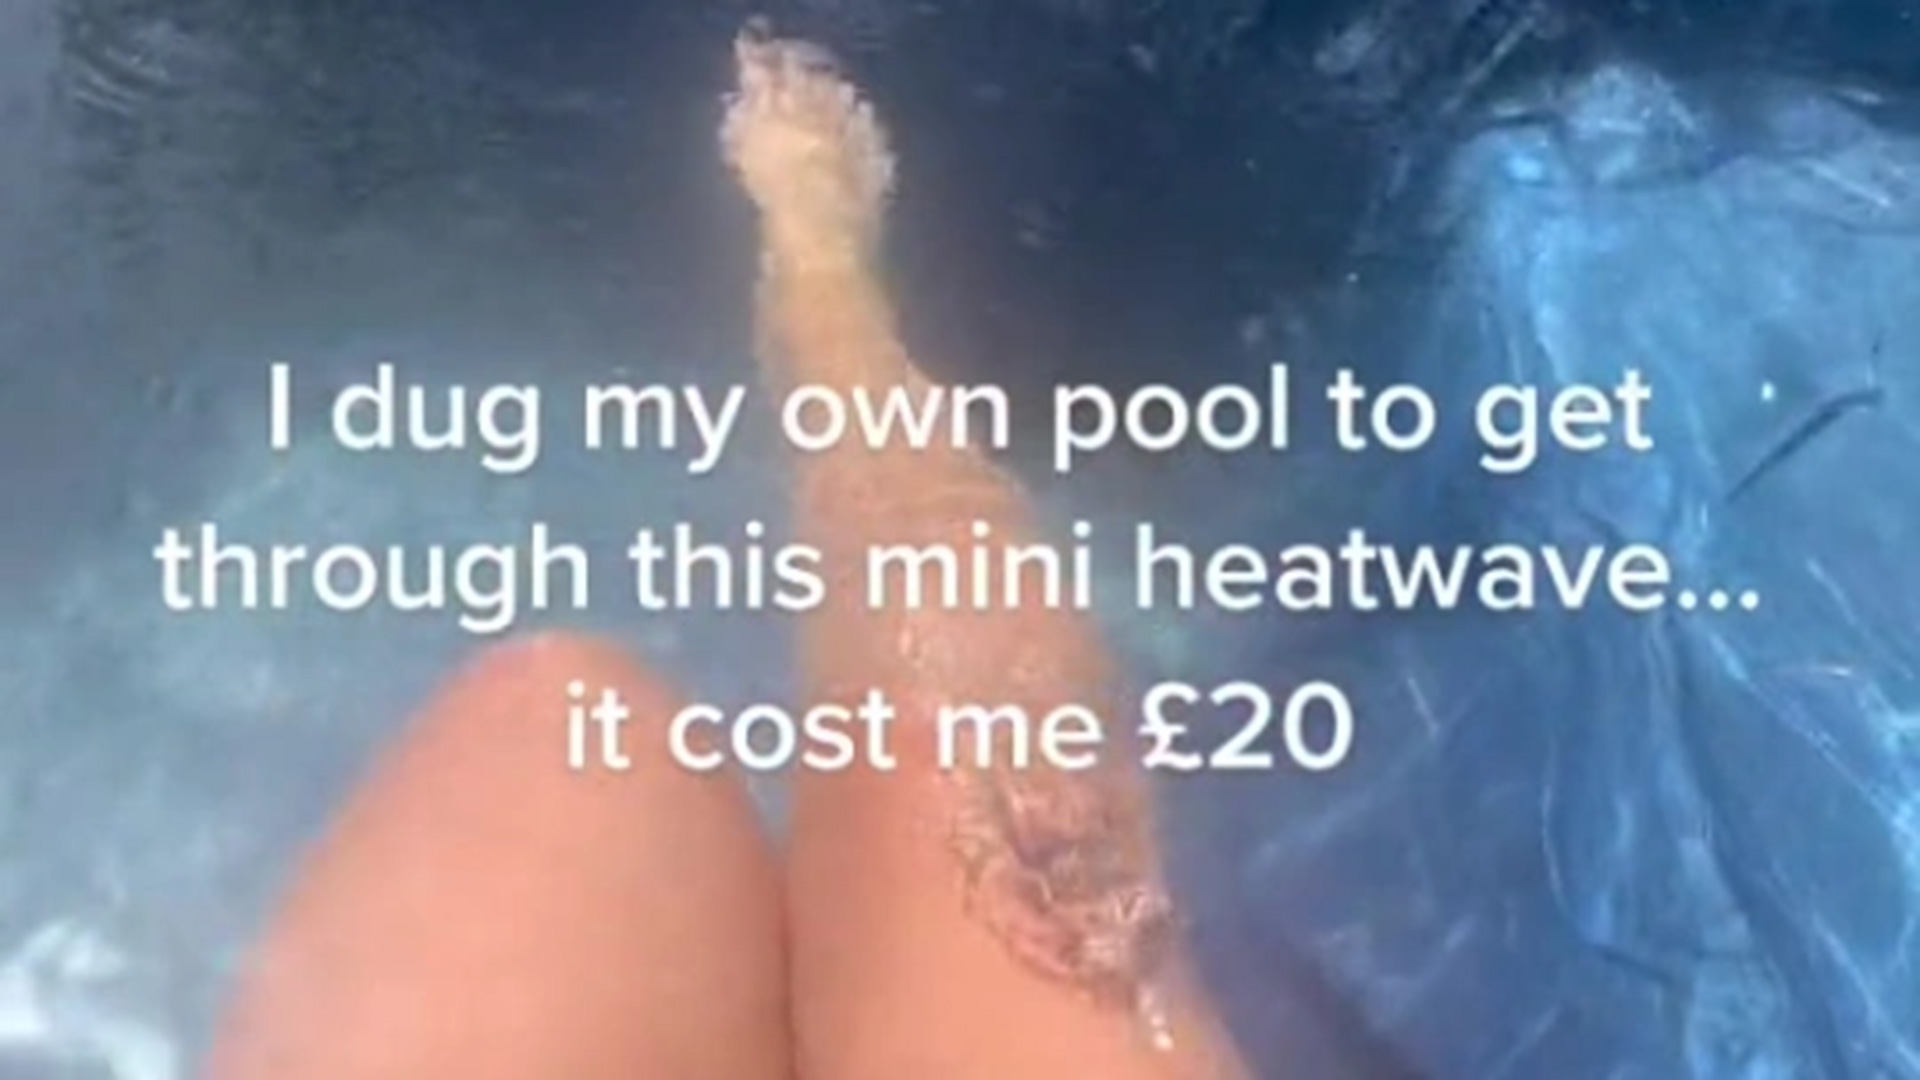 I made my own swimming pool for £20 to get through the heatwave but trolls say I wasted my time